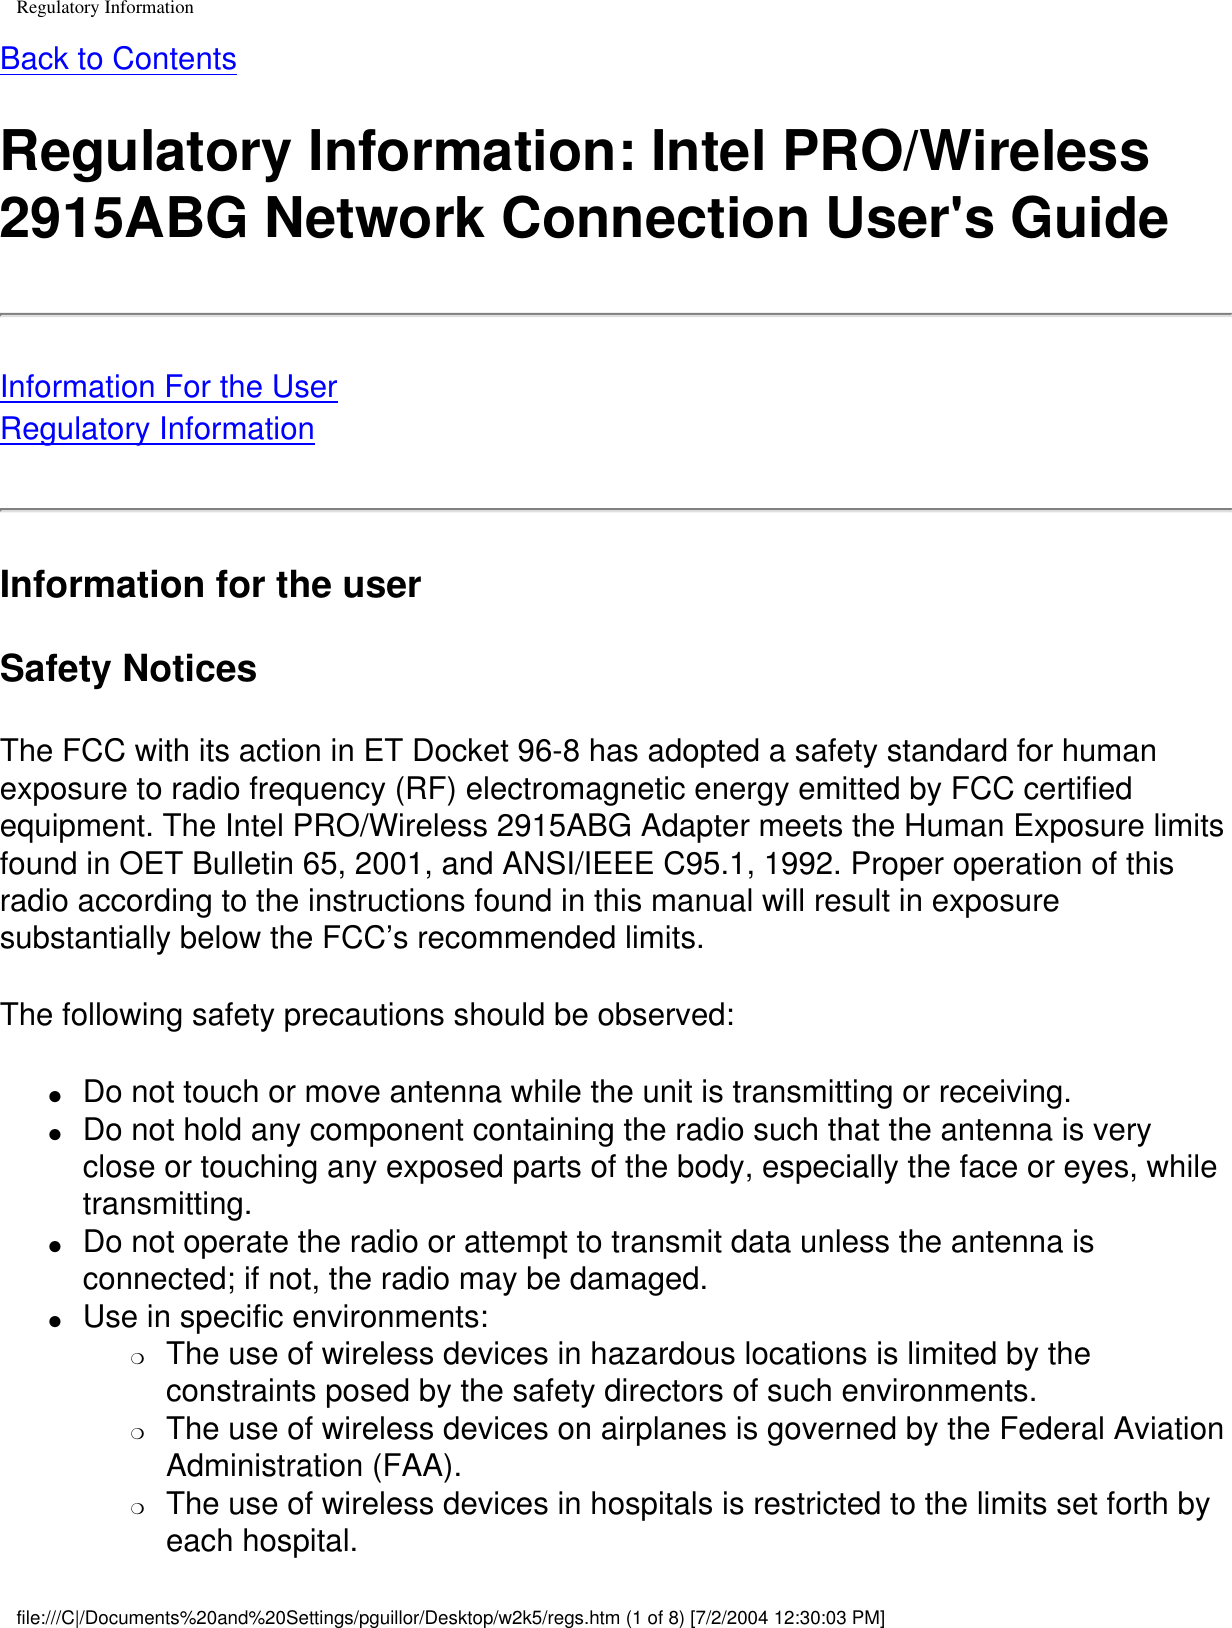 Regulatory InformationBack to ContentsRegulatory Information: Intel PRO/Wireless 2915ABG Network Connection User&apos;s GuideInformation For the UserRegulatory InformationInformation for the userSafety NoticesThe FCC with its action in ET Docket 96-8 has adopted a safety standard for human exposure to radio frequency (RF) electromagnetic energy emitted by FCC certified equipment. The Intel PRO/Wireless 2915ABG Adapter meets the Human Exposure limits found in OET Bulletin 65, 2001, and ANSI/IEEE C95.1, 1992. Proper operation of this radio according to the instructions found in this manual will result in exposure substantially below the FCC’s recommended limits.The following safety precautions should be observed:●     Do not touch or move antenna while the unit is transmitting or receiving.●     Do not hold any component containing the radio such that the antenna is very close or touching any exposed parts of the body, especially the face or eyes, while transmitting.●     Do not operate the radio or attempt to transmit data unless the antenna is connected; if not, the radio may be damaged.●     Use in specific environments: ❍     The use of wireless devices in hazardous locations is limited by the constraints posed by the safety directors of such environments.❍     The use of wireless devices on airplanes is governed by the Federal Aviation Administration (FAA).❍     The use of wireless devices in hospitals is restricted to the limits set forth by each hospital.file:///C|/Documents%20and%20Settings/pguillor/Desktop/w2k5/regs.htm (1 of 8) [7/2/2004 12:30:03 PM]